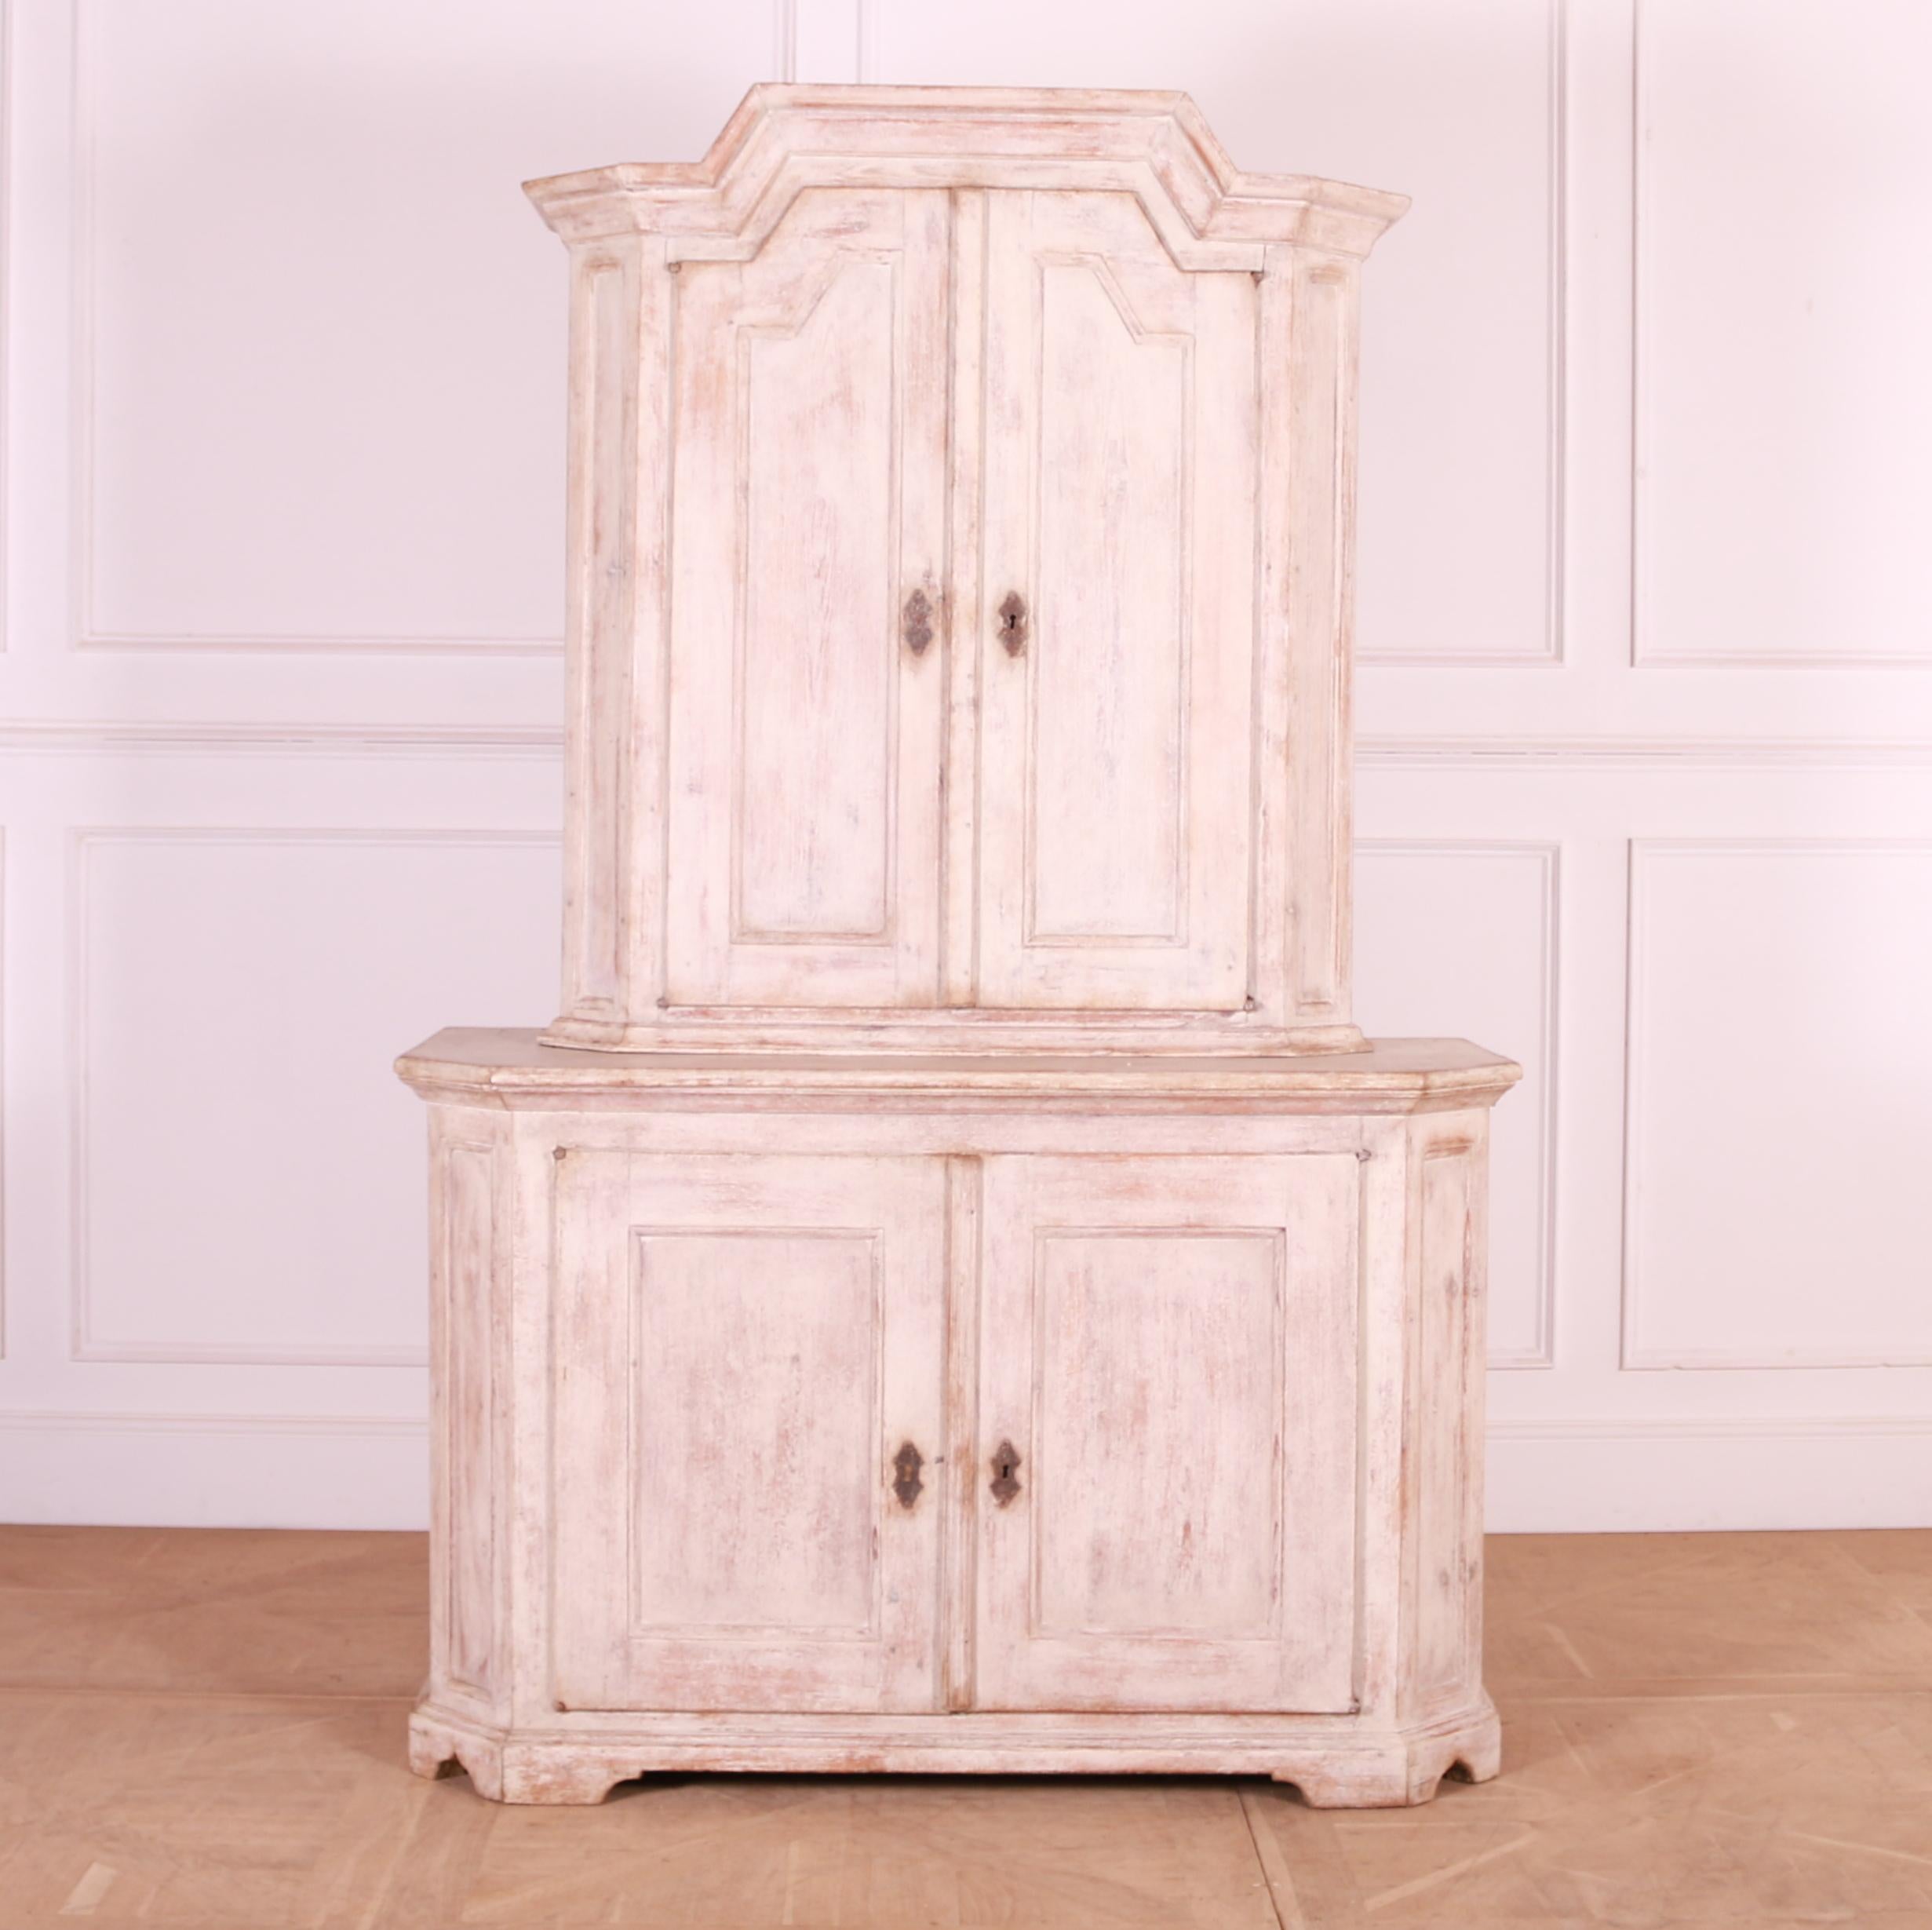 Early 19th C Swedish painted pine linen cupboard. Lovely distressed paint finish. 1810.

Internal depth: top is 10.5